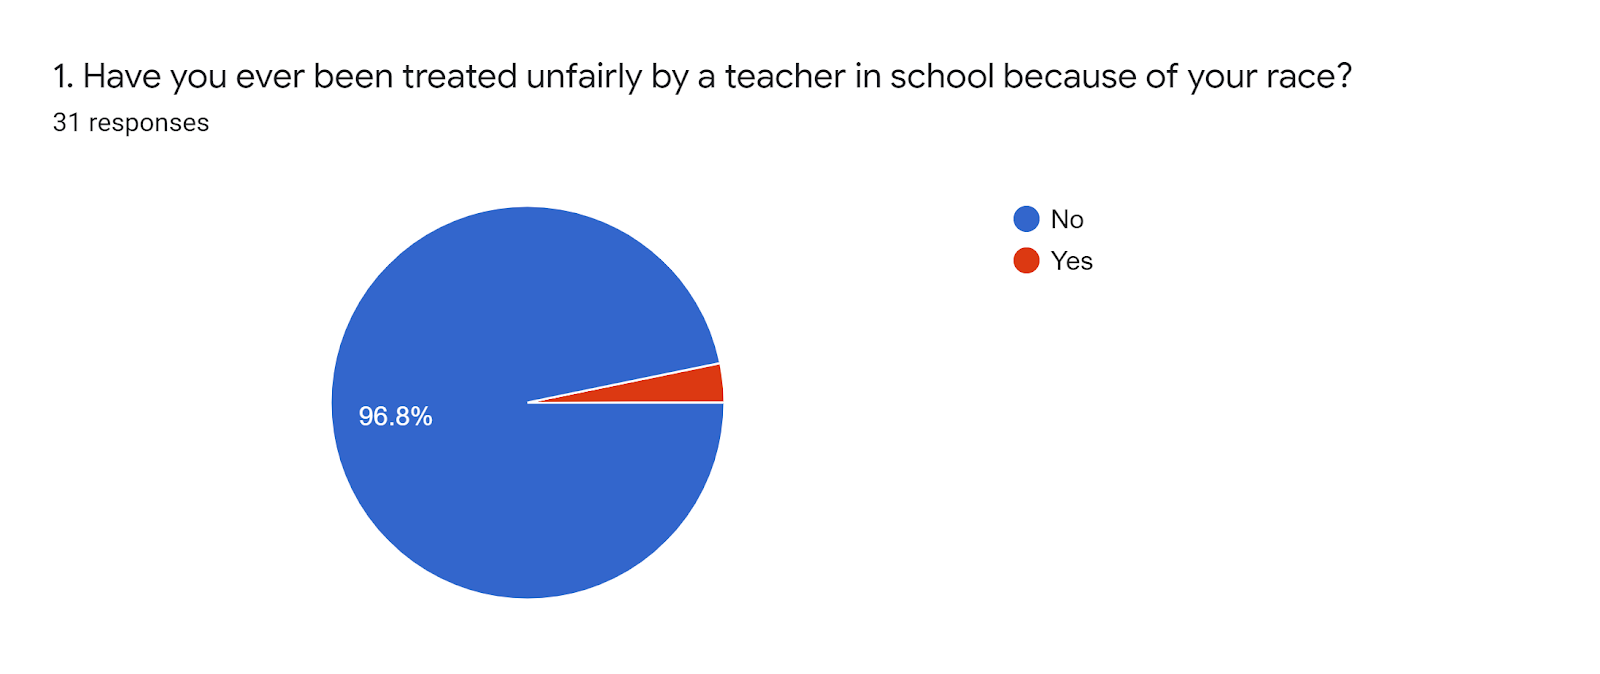 Forms response chart. Question title: 1. Have you ever been treated unfairly by a teacher in school because of your race?. Number of responses: 31 responses.